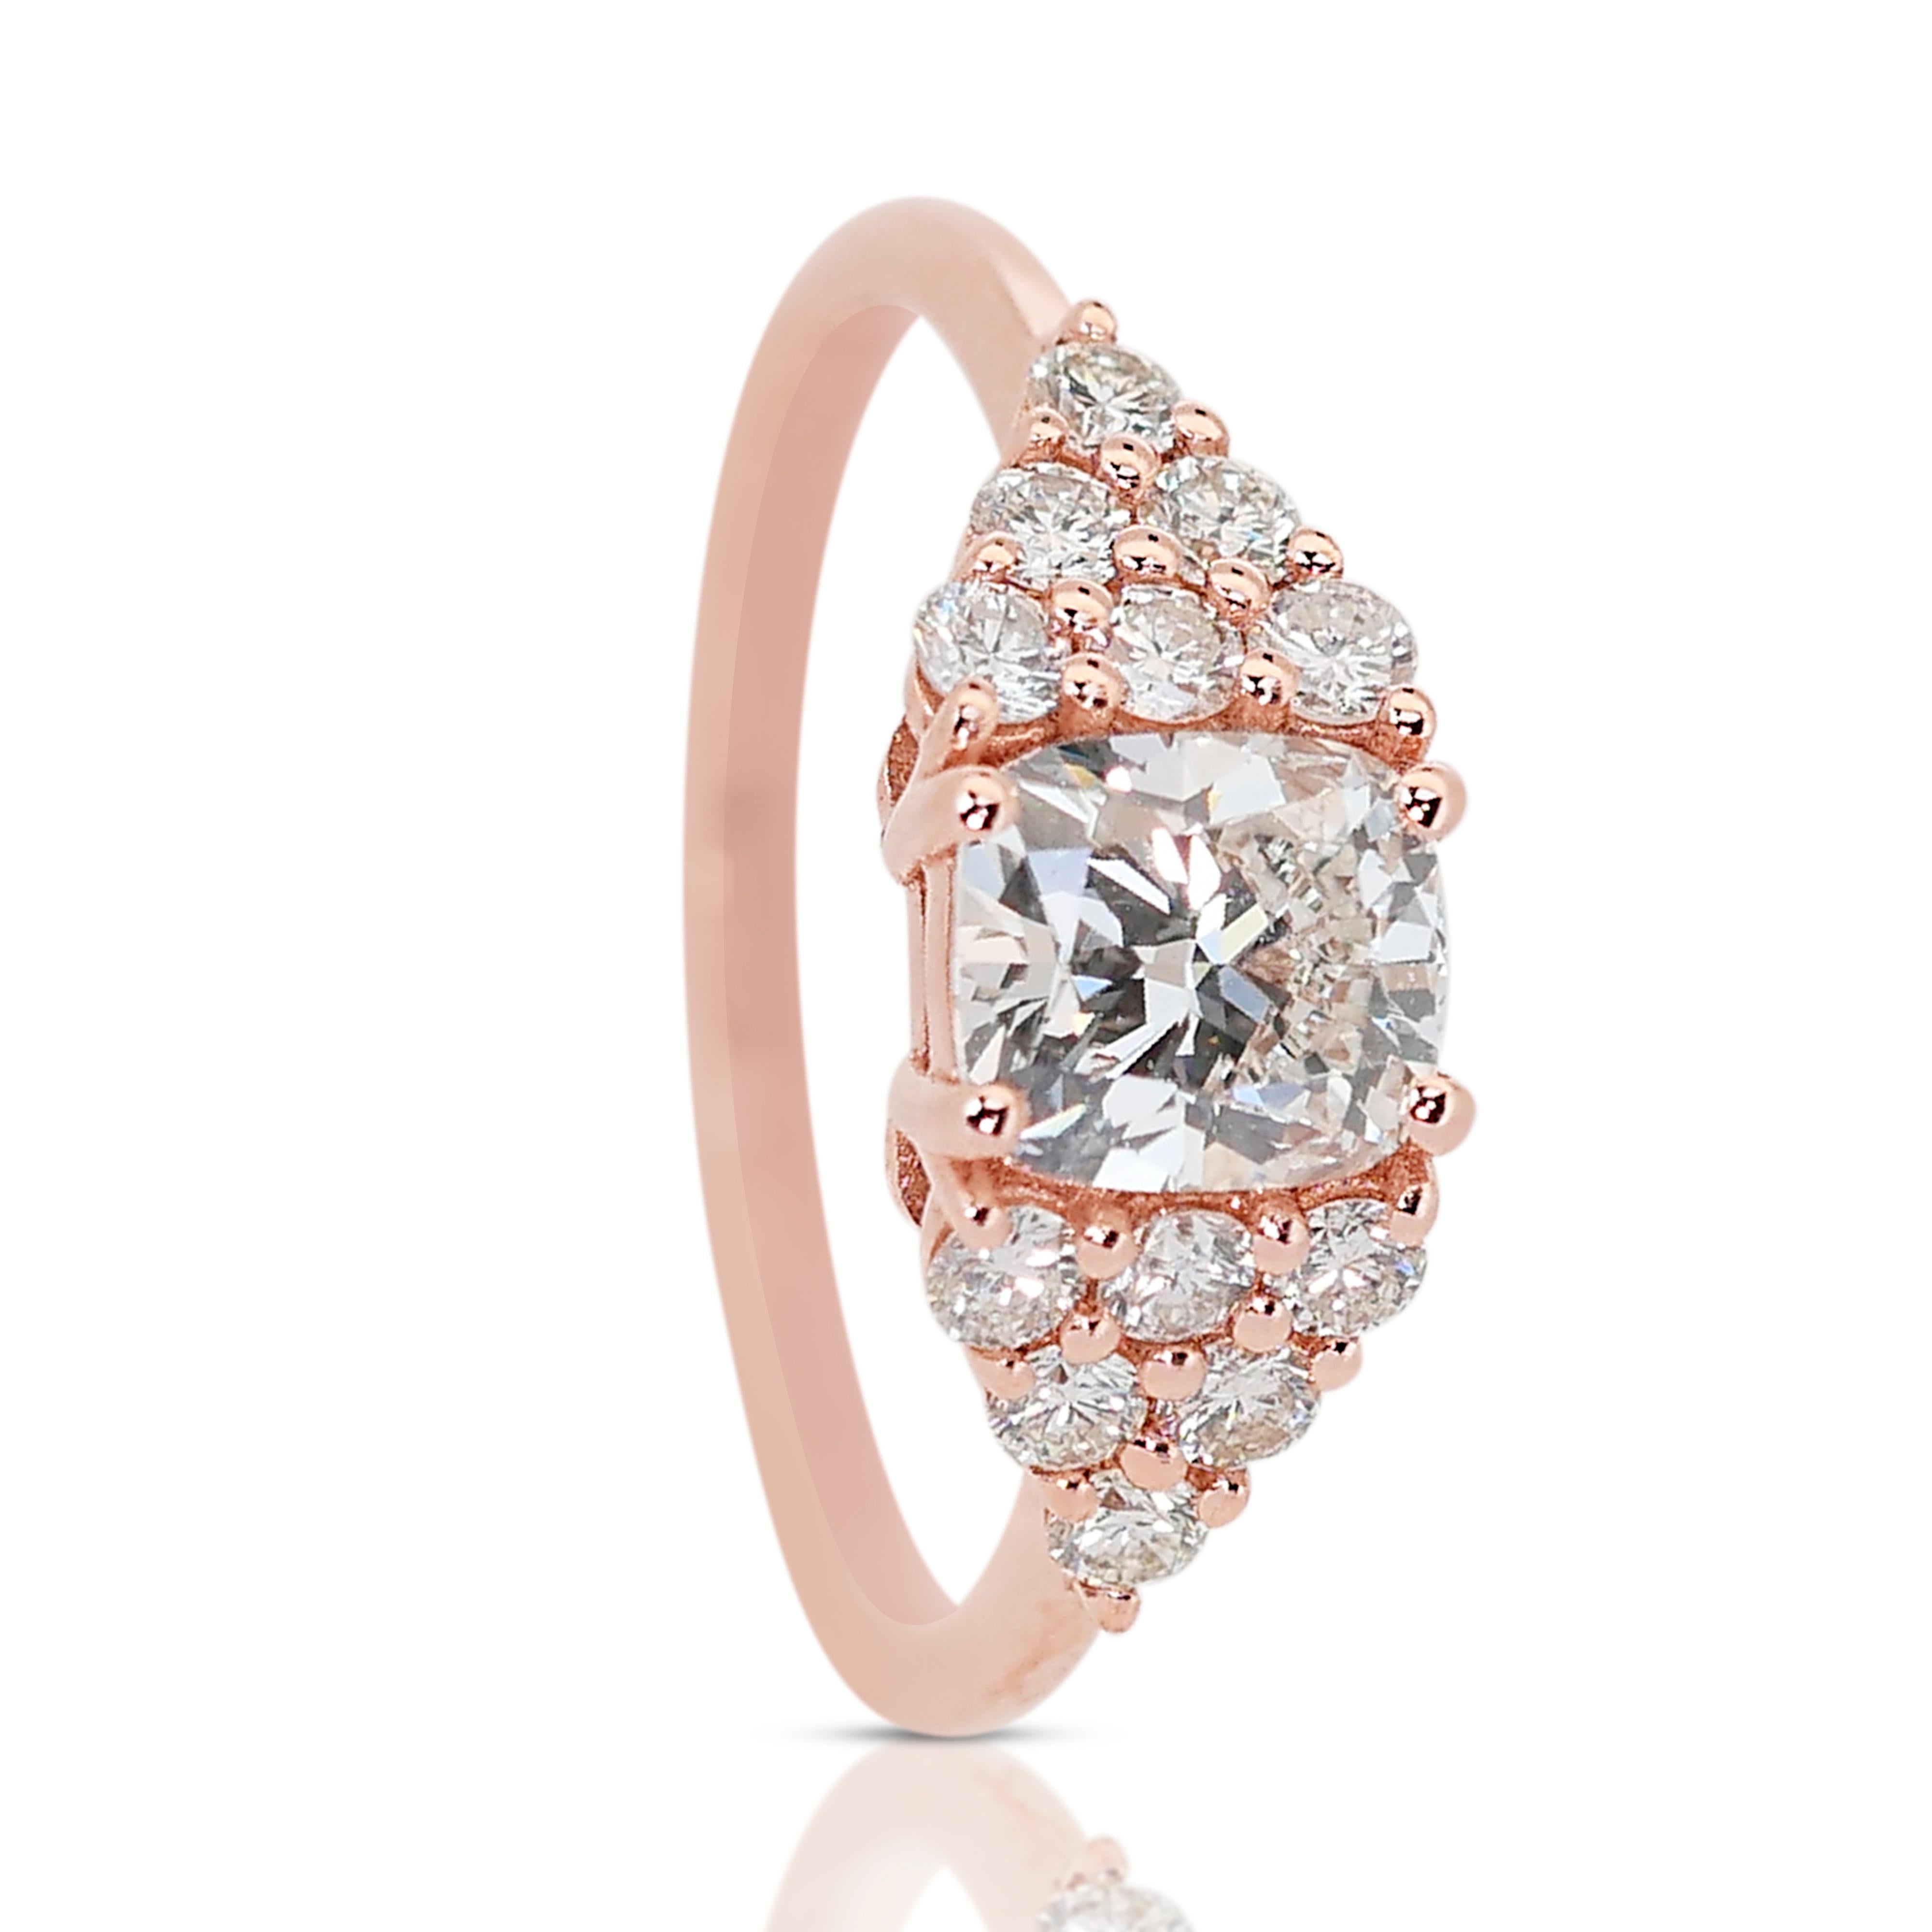 Cushion Cut Lovely 1.65ct Diamonds Pave Ring in 14k Rose Gold - IGI Certified For Sale